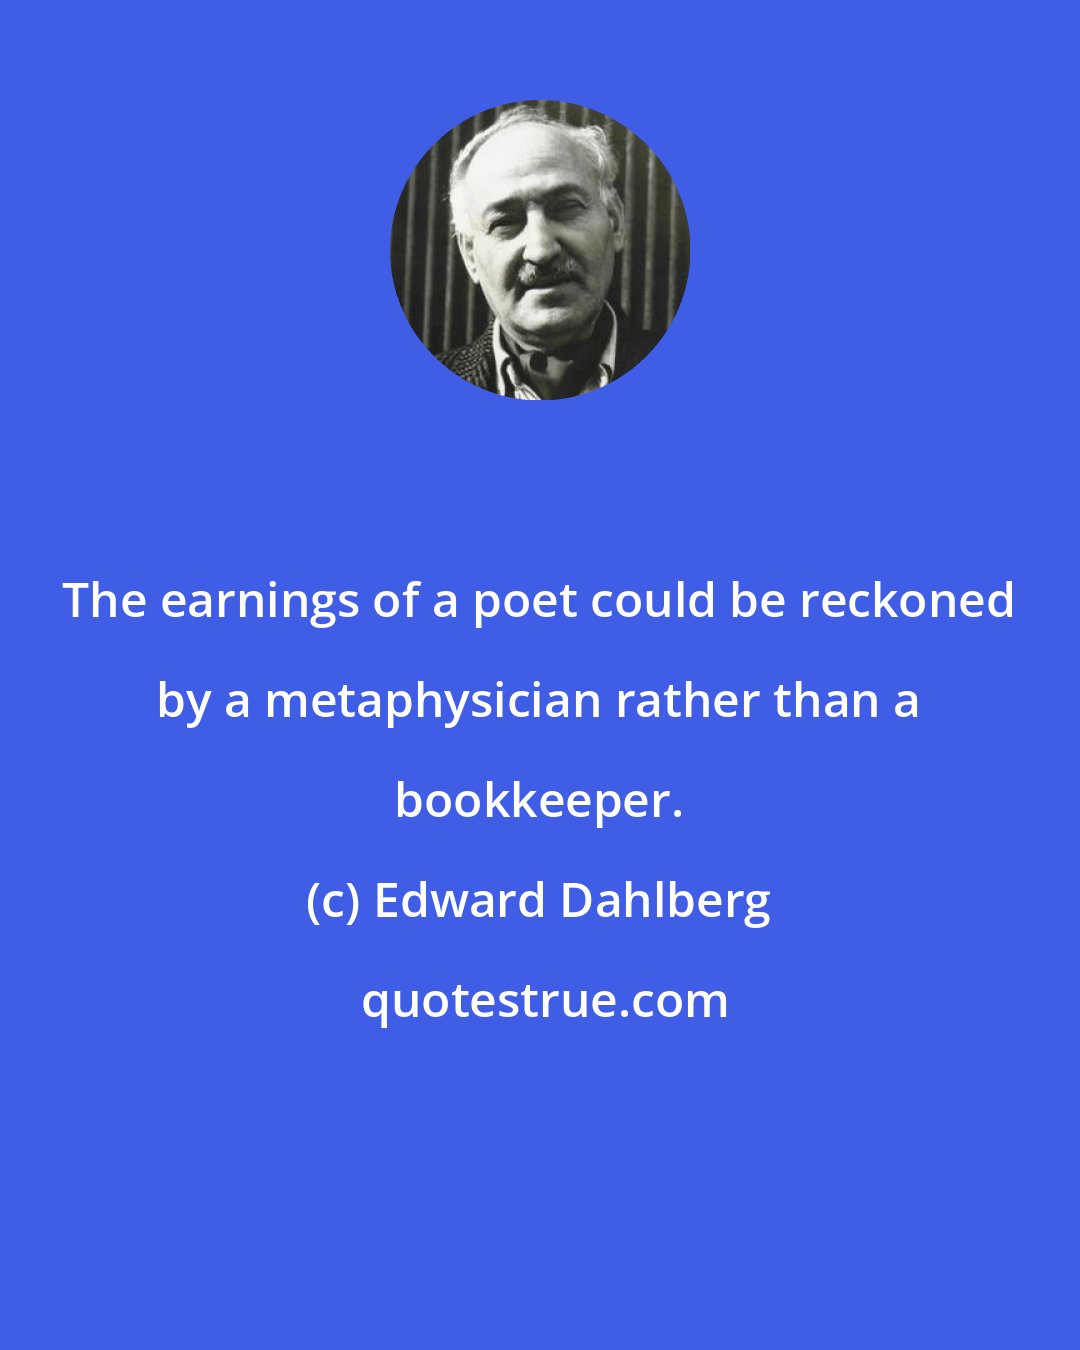 Edward Dahlberg: The earnings of a poet could be reckoned by a metaphysician rather than a bookkeeper.